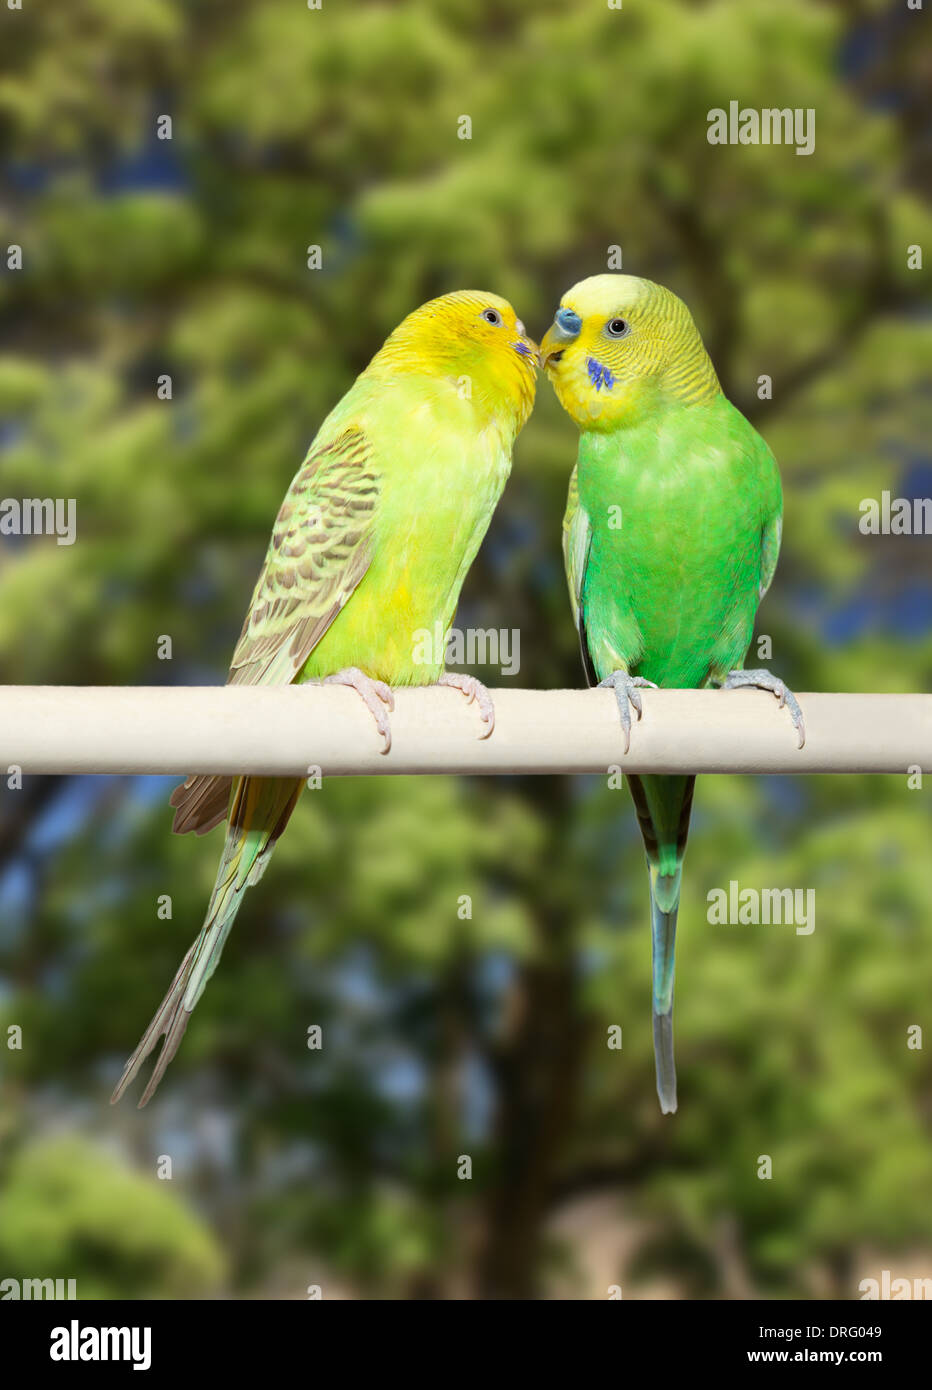 Couple of yellow and green parrots on vegetation background Stock Photo